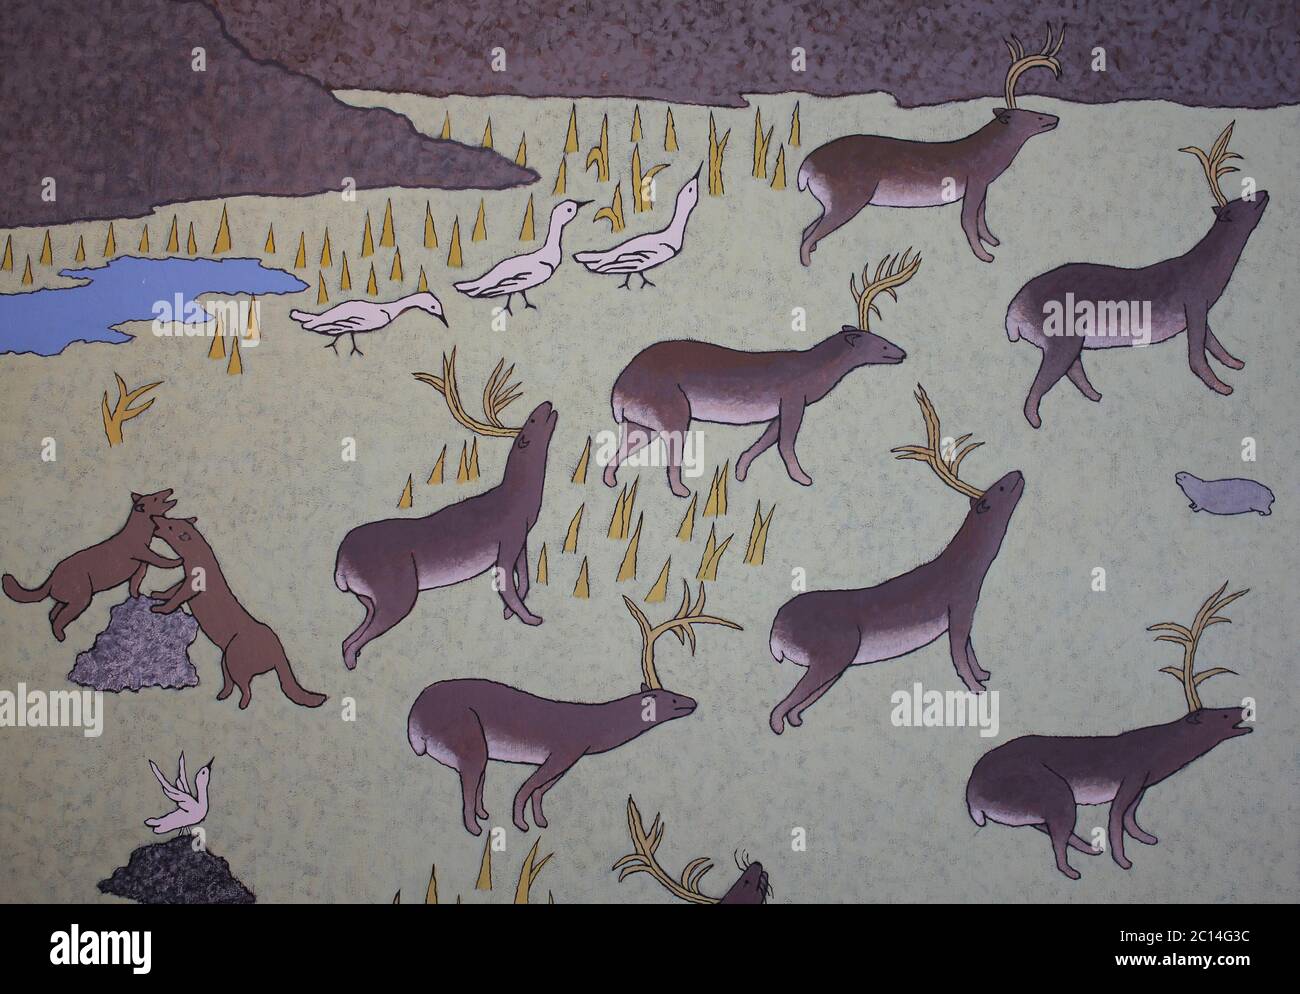 Caribou Wandering Into Inuit Camp Looking For Food by Cape Dorset Artist Mary Pudlat Stock Photo